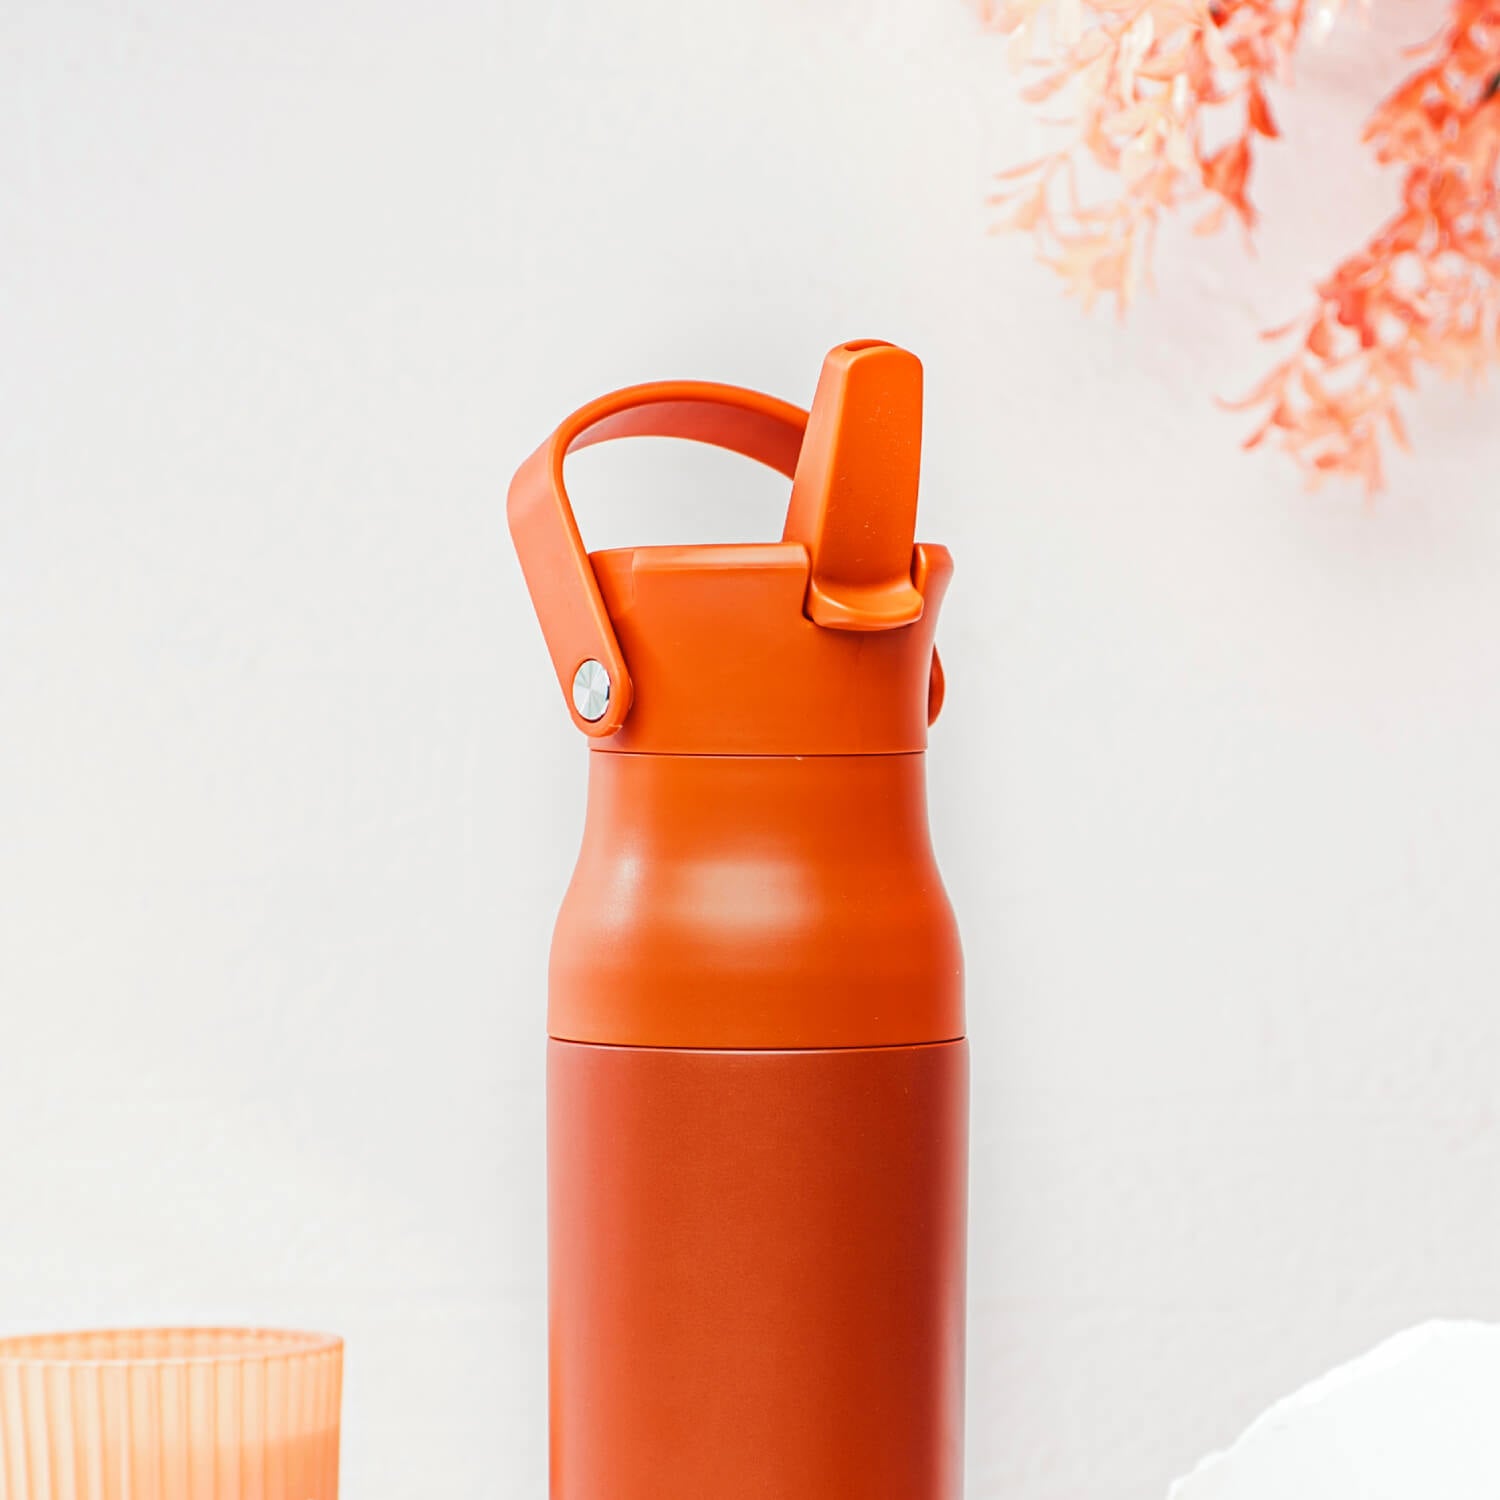 DESIGN YOUR OWN PERSONALIZED WATER BOTTLE - The Toy Insider